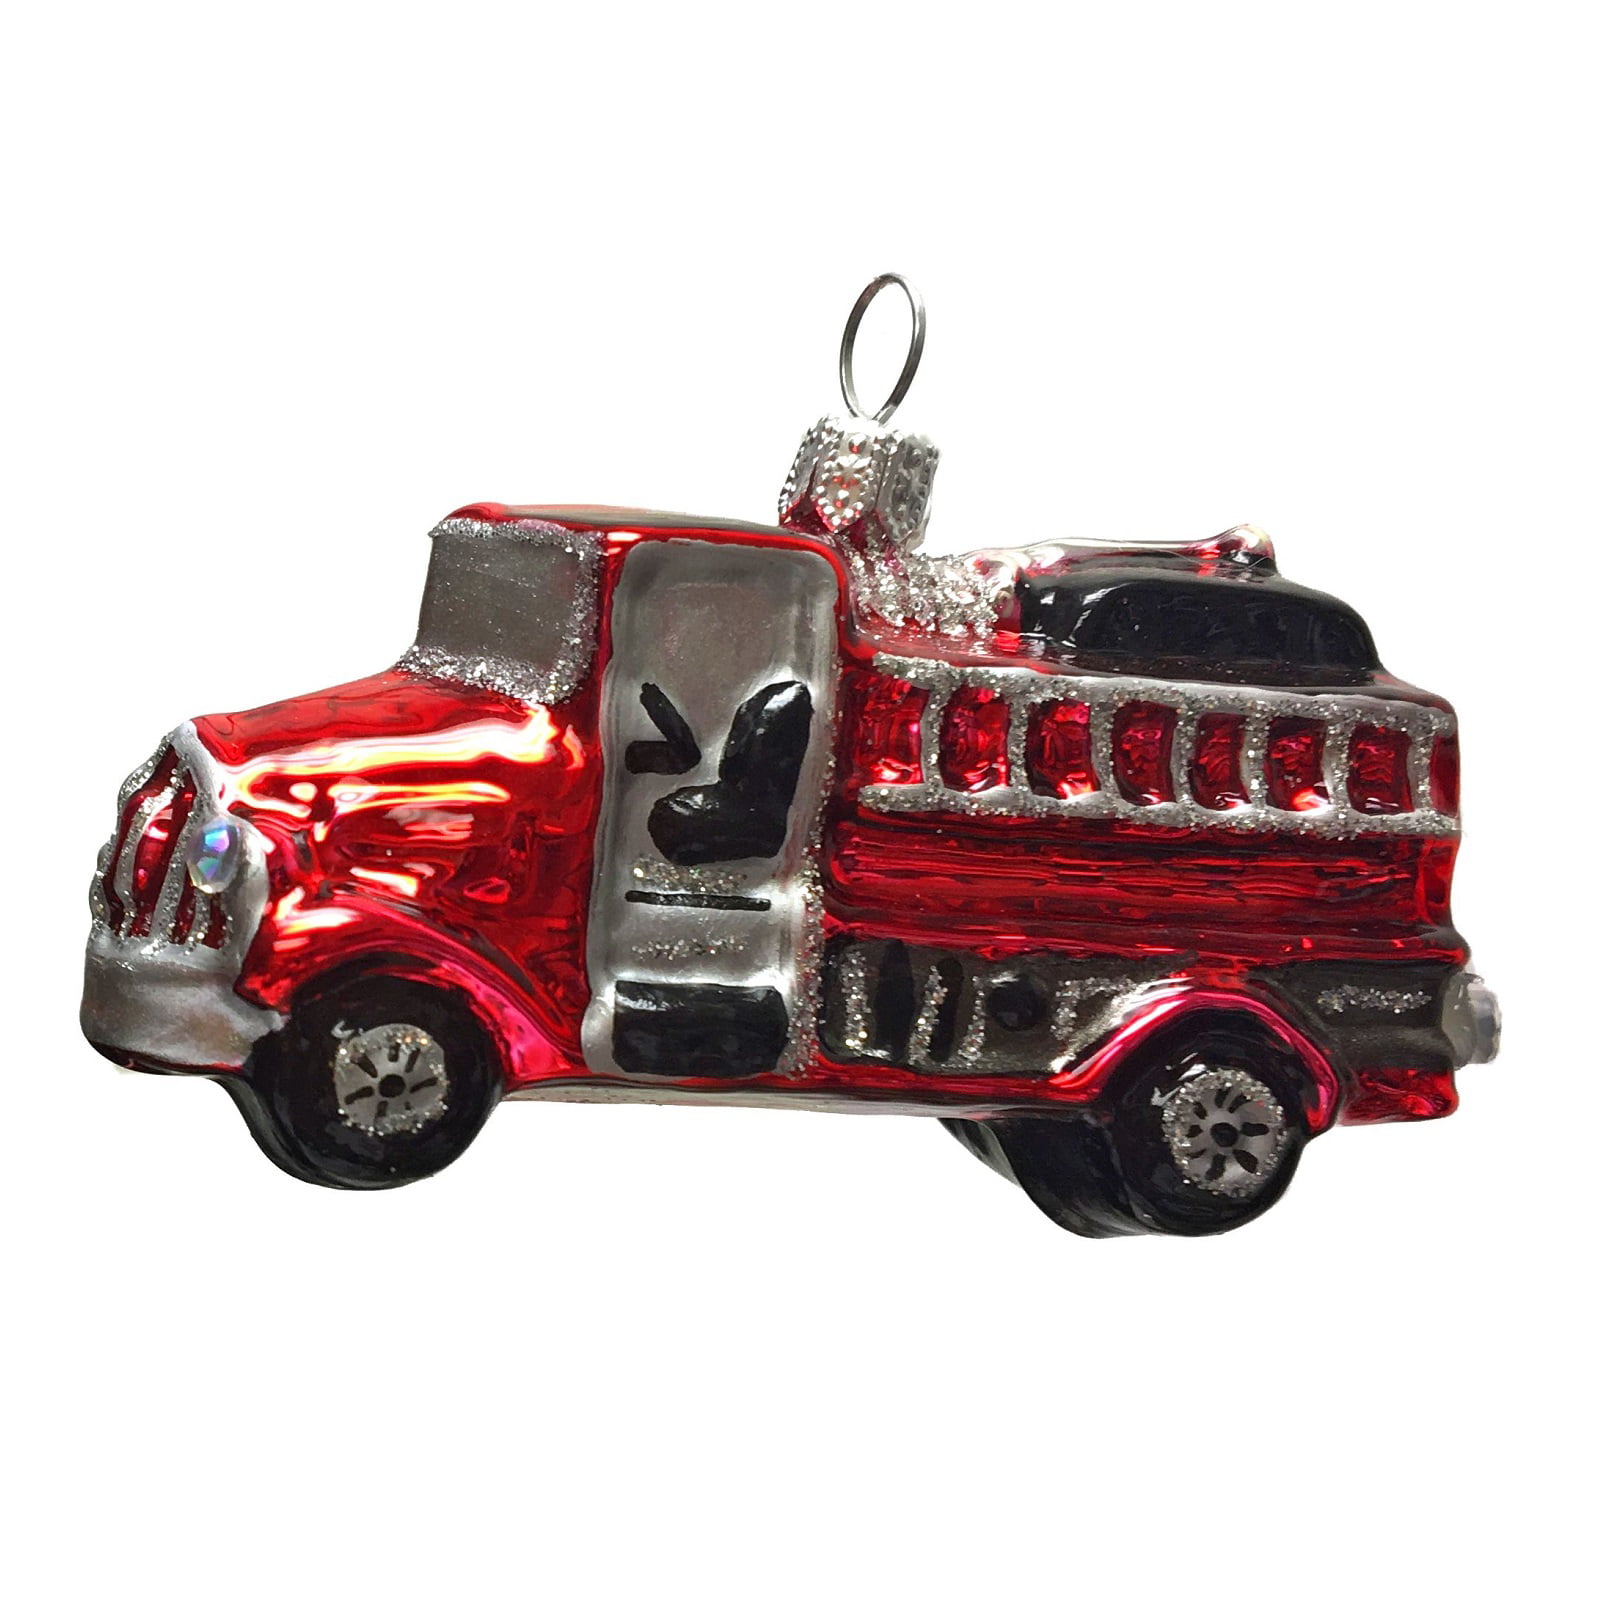 * NEW VW BEETLE BUG CONCEPT CONVERTIBLE IMPORT GERMAN RED CHRISTMAS ORNAMENT 